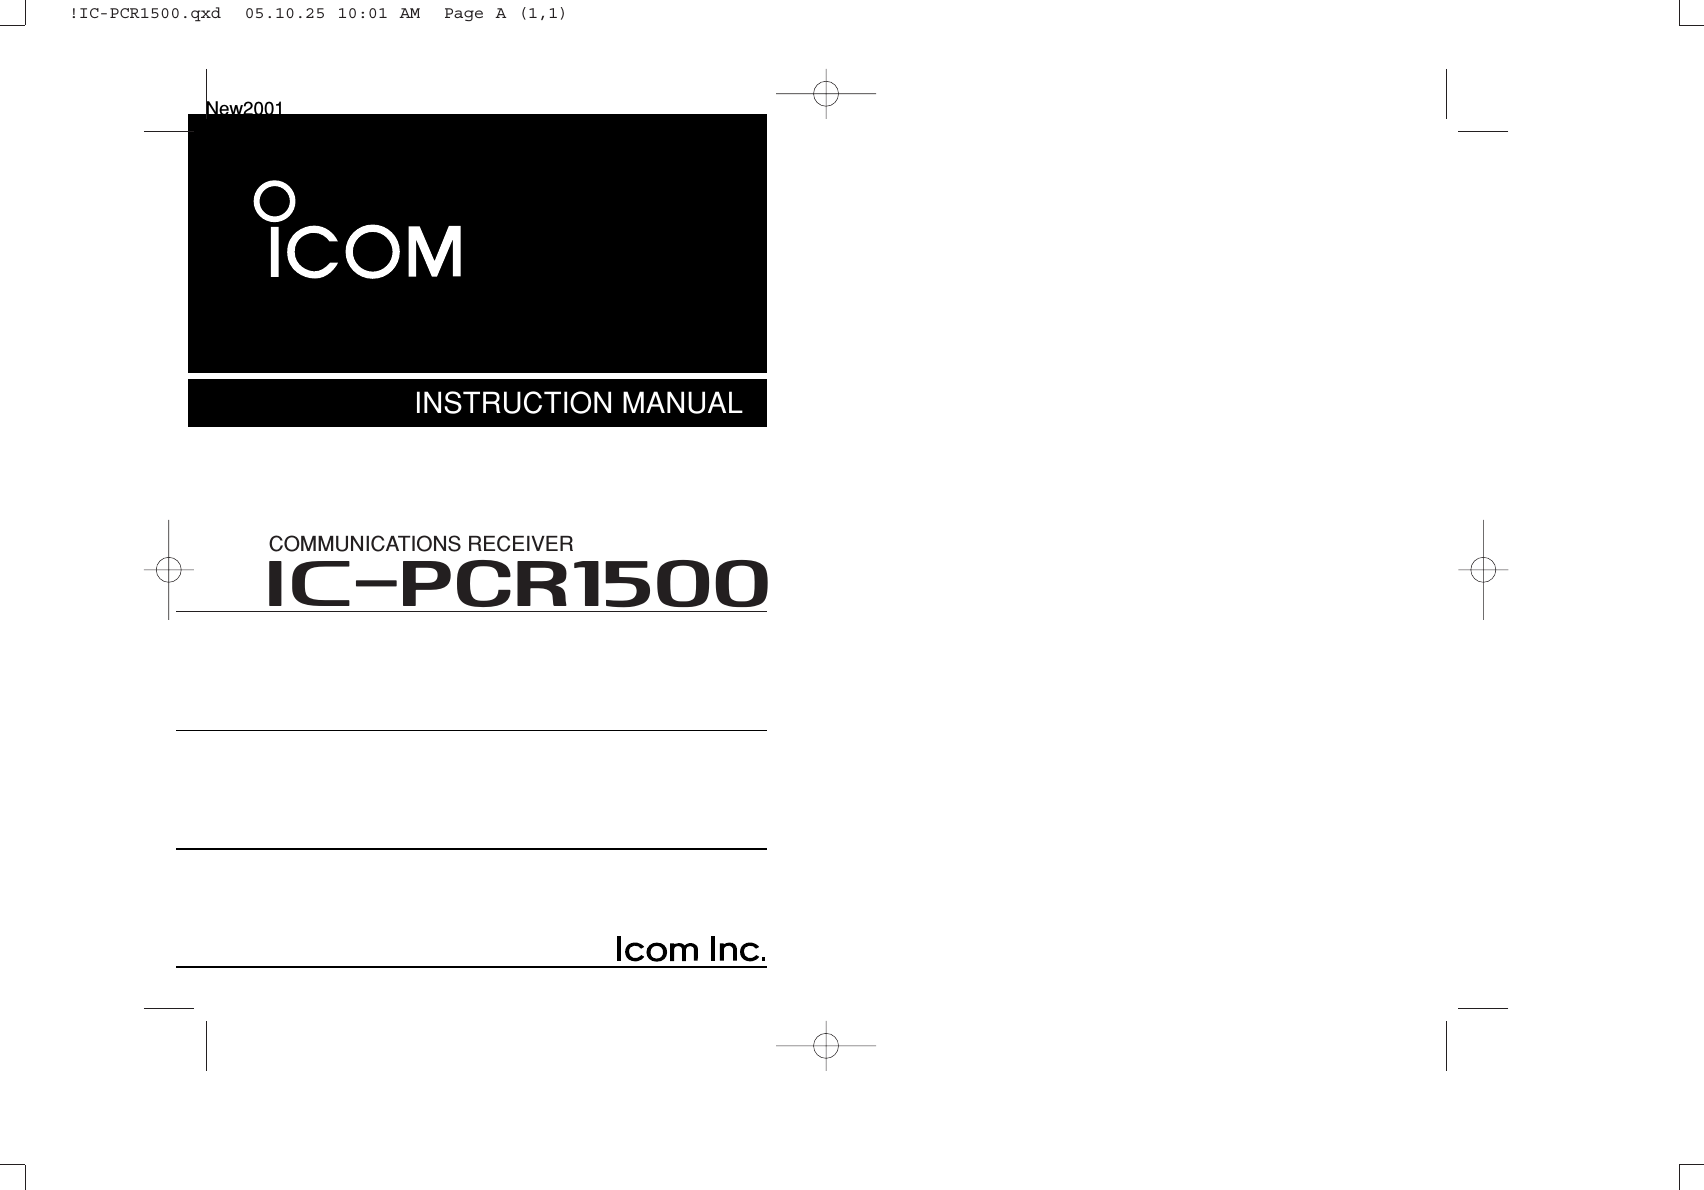 INSTRUCTION MANUALNew2001iPCR1500COMMUNICATIONS RECEIVER!IC-PCR1500.qxd  05.10.25 10:01 AM  Page A (1,1)